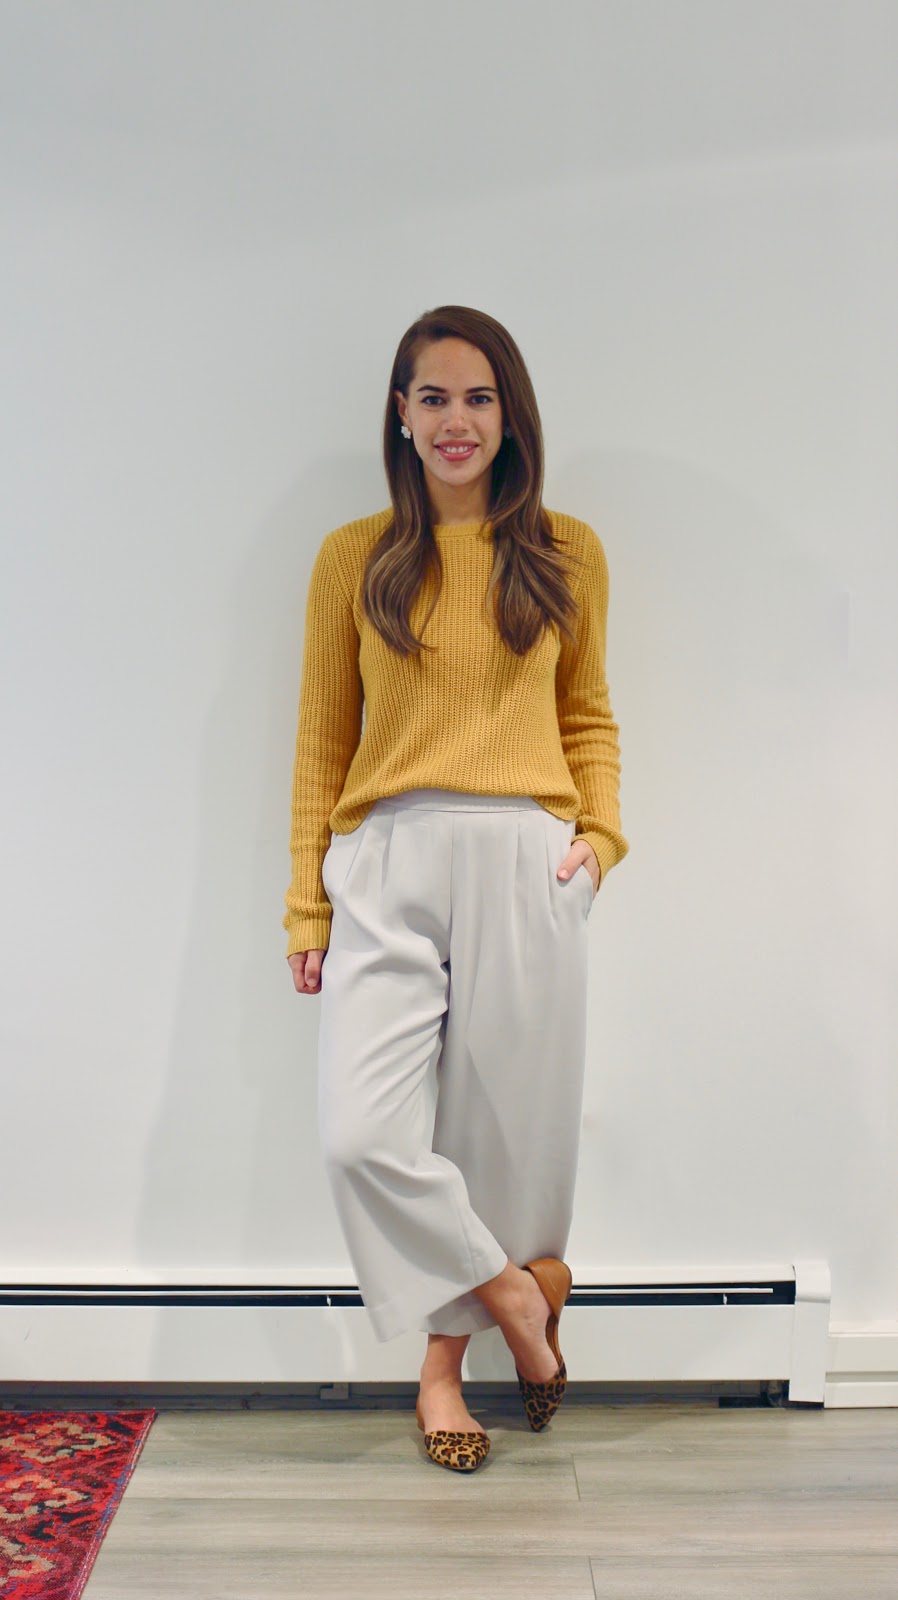 Jules in Flats - Wide Leg Crop Pants with Mustard Sweater (Business Casual Workwear on a Budget) 